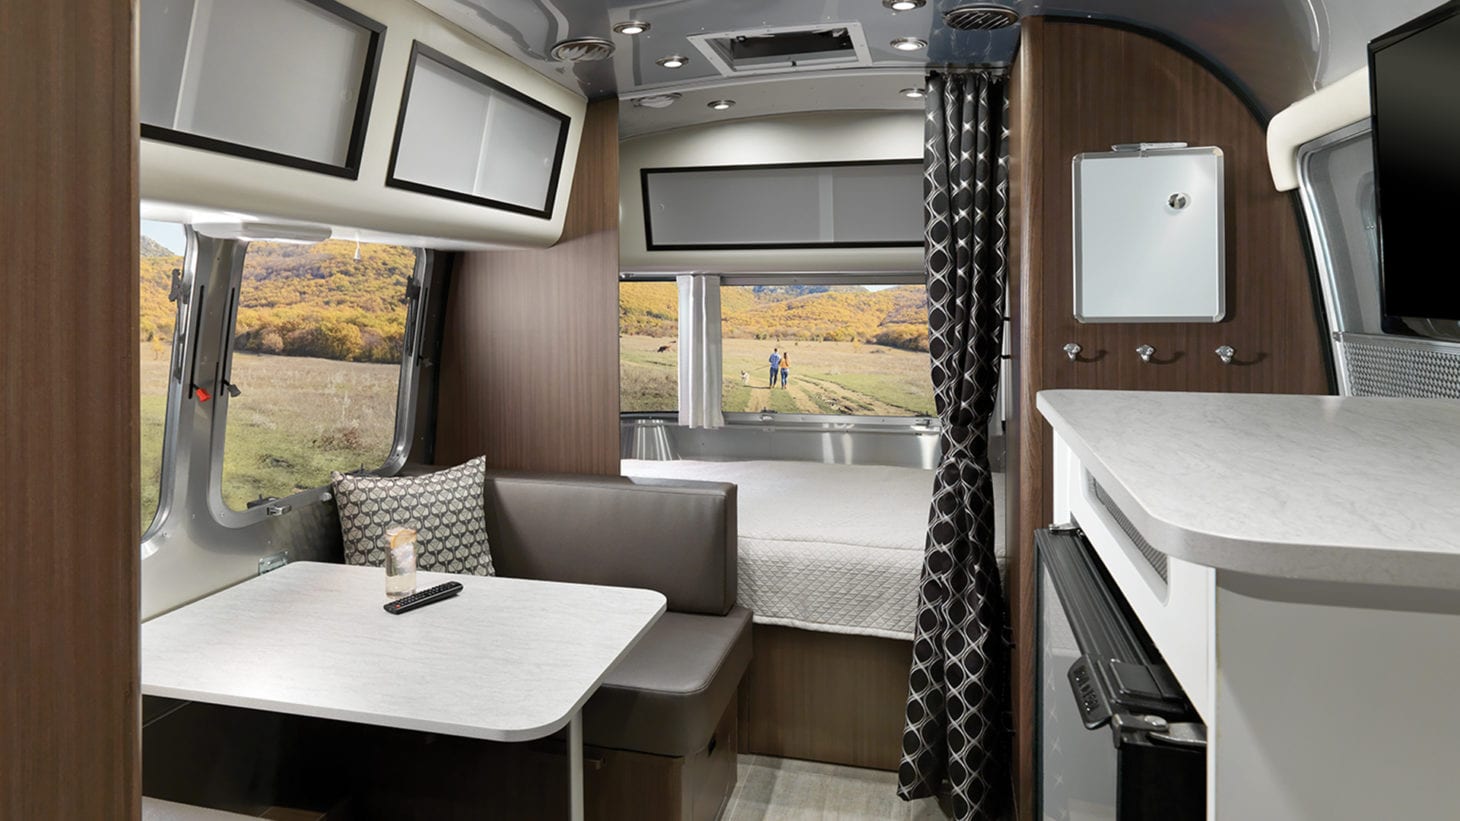 Interior view of Airstream trailer living and bed area